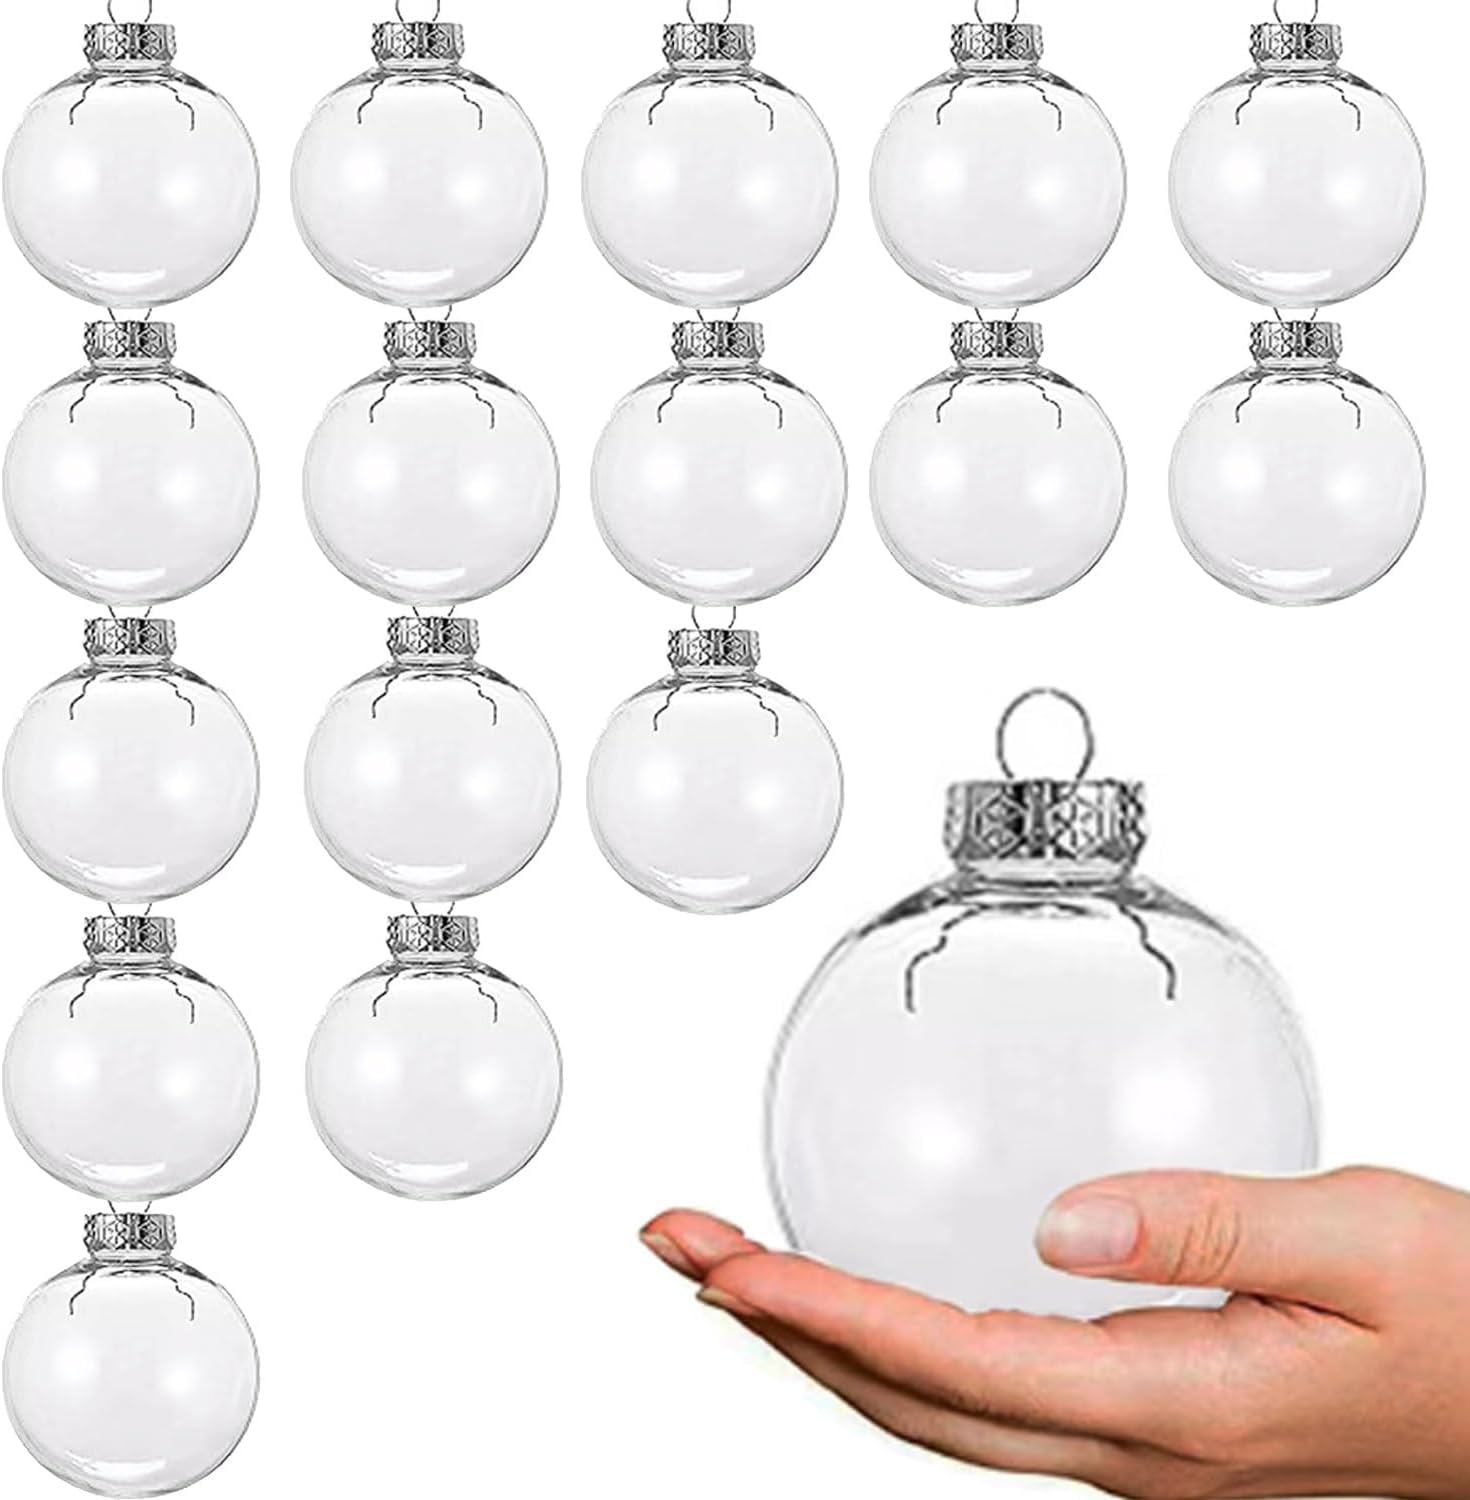 6pcs Transparent Christmas Ball Decoration,Hanging Clear Plastic Fillable  Ornaments Balls DIY Balls, Craft Ornaments, For Wedding Birthday Party  Decorations Creative Gift Decorations